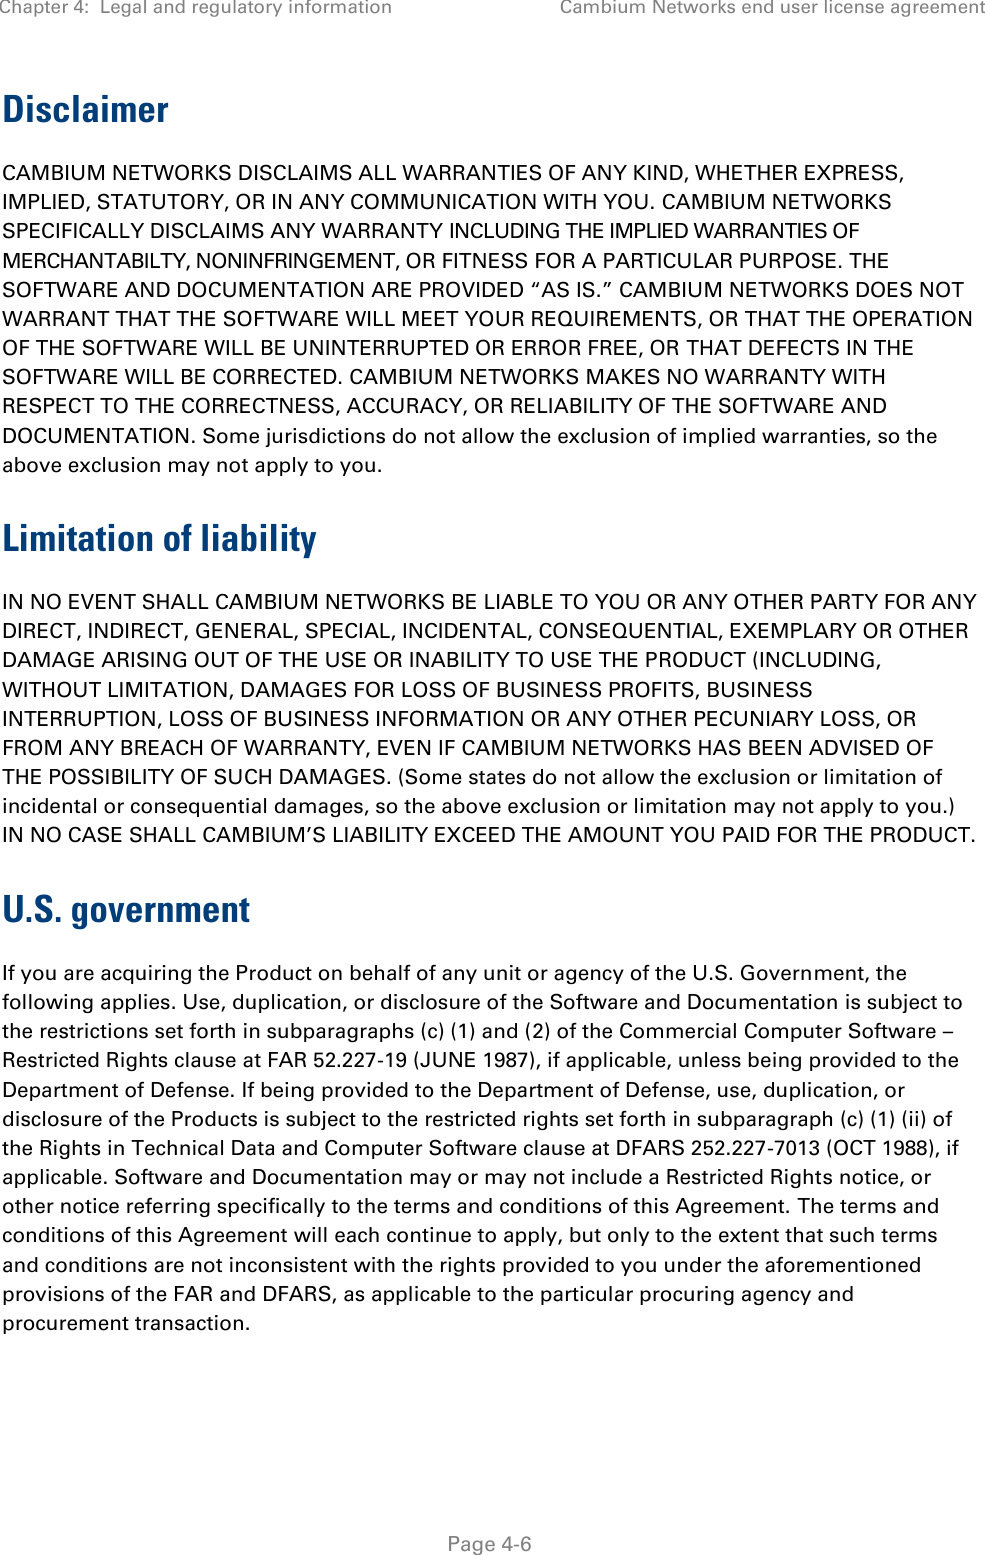 Chapter 4:  Legal and regulatory information Cambium Networks end user license agreement   Page 4-6 Disclaimer CAMBIUM NETWORKS DISCLAIMS ALL WARRANTIES OF ANY KIND, WHETHER EXPRESS, IMPLIED, STATUTORY, OR IN ANY COMMUNICATION WITH YOU. CAMBIUM NETWORKS SPECIFICALLY DISCLAIMS ANY WARRANTY INCLUDING THE IMPLIED WARRANTIES OF MERCHANTABILTY, NONINFRINGEMENT, OR FITNESS FOR A PARTICULAR PURPOSE. THE SOFTWARE AND DOCUMENTATION ARE PROVIDED “AS IS.” CAMBIUM NETWORKS DOES NOT WARRANT THAT THE SOFTWARE WILL MEET YOUR REQUIREMENTS, OR THAT THE OPERATION OF THE SOFTWARE WILL BE UNINTERRUPTED OR ERROR FREE, OR THAT DEFECTS IN THE SOFTWARE WILL BE CORRECTED. CAMBIUM NETWORKS MAKES NO WARRANTY WITH RESPECT TO THE CORRECTNESS, ACCURACY, OR RELIABILITY OF THE SOFTWARE AND DOCUMENTATION. Some jurisdictions do not allow the exclusion of implied warranties, so the above exclusion may not apply to you. Limitation of liability IN NO EVENT SHALL CAMBIUM NETWORKS BE LIABLE TO YOU OR ANY OTHER PARTY FOR ANY DIRECT, INDIRECT, GENERAL, SPECIAL, INCIDENTAL, CONSEQUENTIAL, EXEMPLARY OR OTHER DAMAGE ARISING OUT OF THE USE OR INABILITY TO USE THE PRODUCT (INCLUDING, WITHOUT LIMITATION, DAMAGES FOR LOSS OF BUSINESS PROFITS, BUSINESS INTERRUPTION, LOSS OF BUSINESS INFORMATION OR ANY OTHER PECUNIARY LOSS, OR FROM ANY BREACH OF WARRANTY, EVEN IF CAMBIUM NETWORKS HAS BEEN ADVISED OF THE POSSIBILITY OF SUCH DAMAGES. (Some states do not allow the exclusion or limitation of incidental or consequential damages, so the above exclusion or limitation may not apply to you.) IN NO CASE SHALL CAMBIUM’S LIABILITY EXCEED THE AMOUNT YOU PAID FOR THE PRODUCT. U.S. government If you are acquiring the Product on behalf of any unit or agency of the U.S. Government, the following applies. Use, duplication, or disclosure of the Software and Documentation is subject to the restrictions set forth in subparagraphs (c) (1) and (2) of the Commercial Computer Software – Restricted Rights clause at FAR 52.227-19 (JUNE 1987), if applicable, unless being provided to the Department of Defense. If being provided to the Department of Defense, use, duplication, or disclosure of the Products is subject to the restricted rights set forth in subparagraph (c) (1) (ii) of the Rights in Technical Data and Computer Software clause at DFARS 252.227-7013 (OCT 1988), if applicable. Software and Documentation may or may not include a Restricted Rights notice, or other notice referring specifically to the terms and conditions of this Agreement. The terms and conditions of this Agreement will each continue to apply, but only to the extent that such terms and conditions are not inconsistent with the rights provided to you under the aforementioned provisions of the FAR and DFARS, as applicable to the particular procuring agency and procurement transaction. 